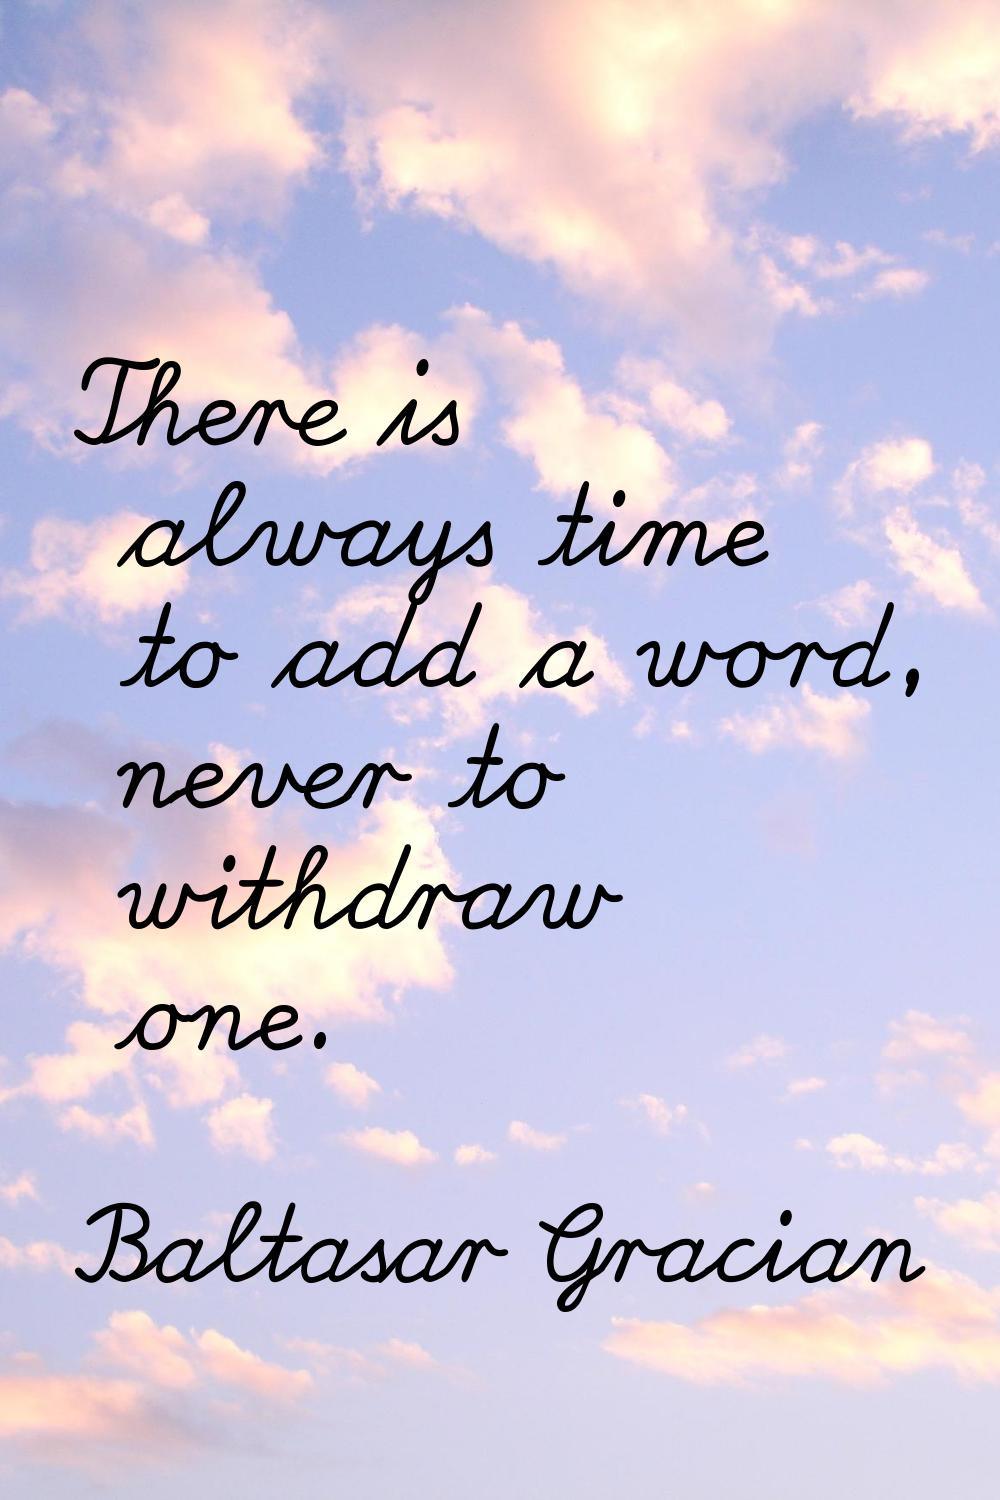 There is always time to add a word, never to withdraw one.